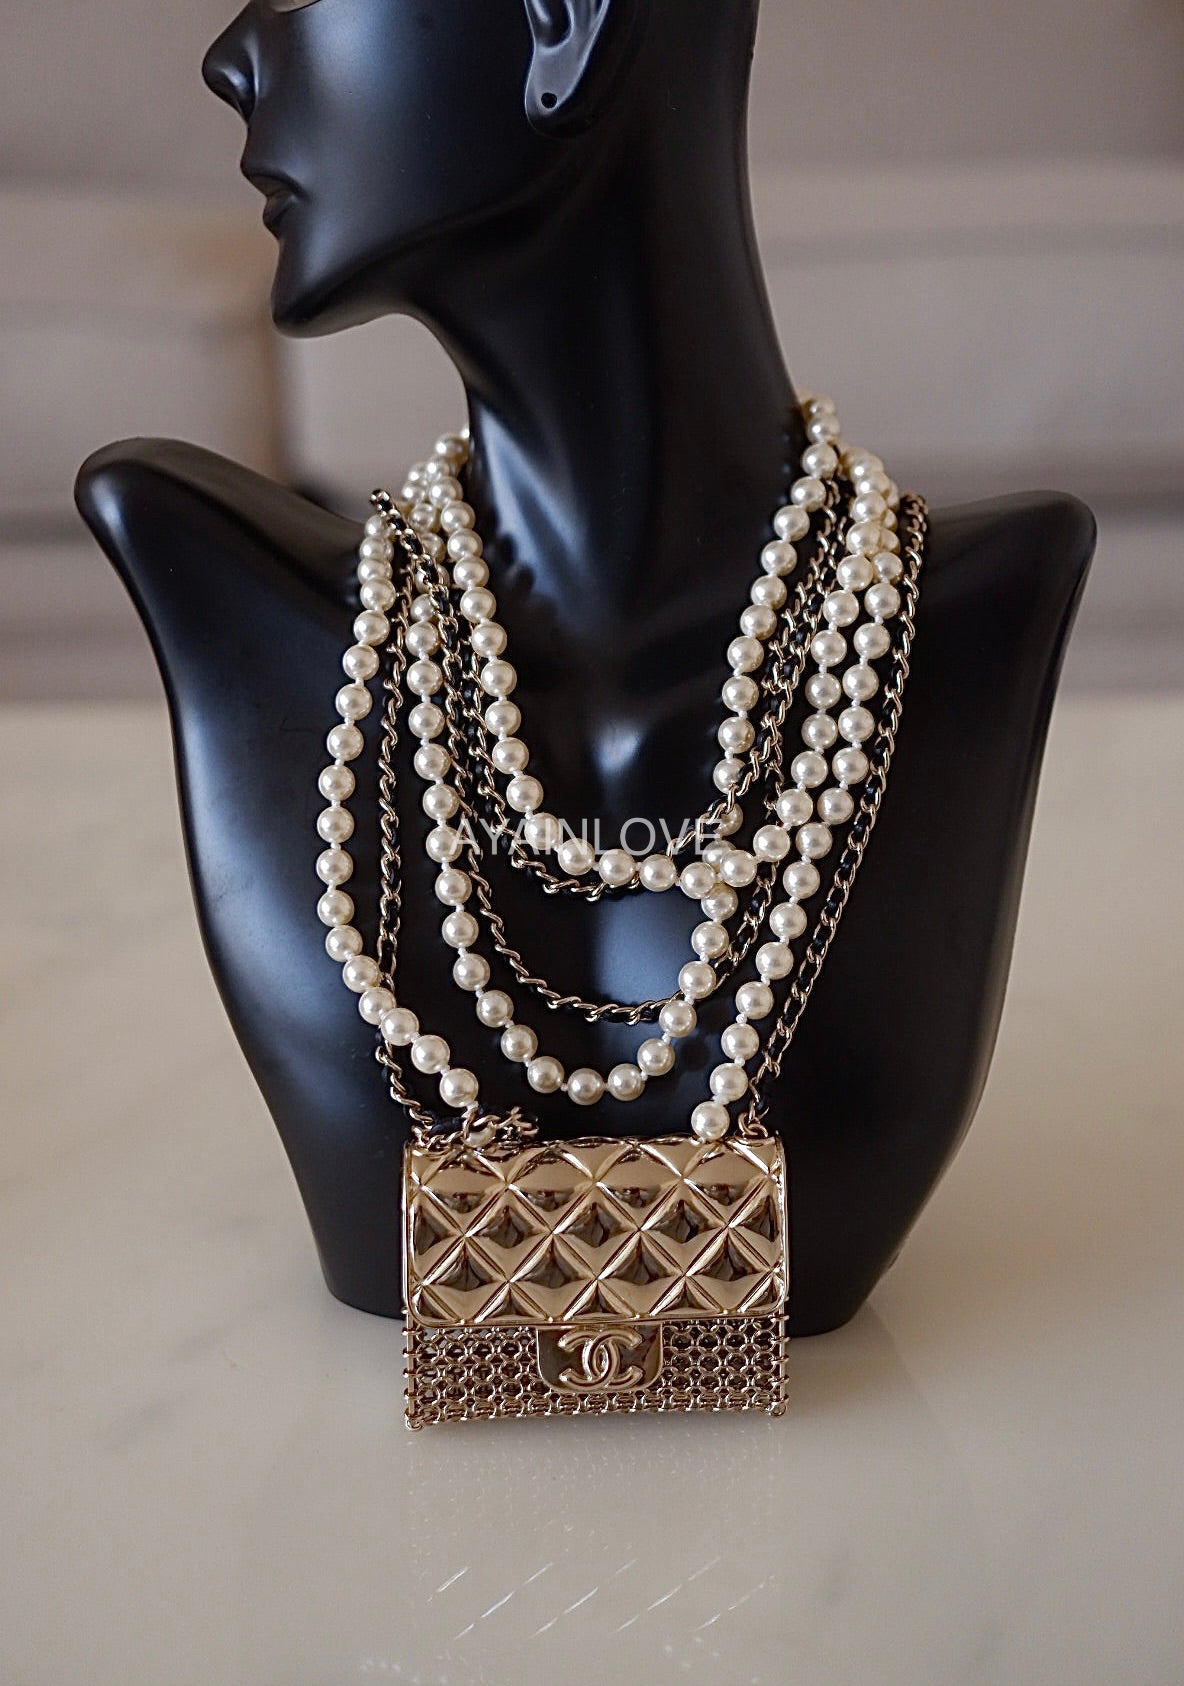 CHANEL - 05P Iridescent CC Crystal and Faux Pearl Mosaic Necklace